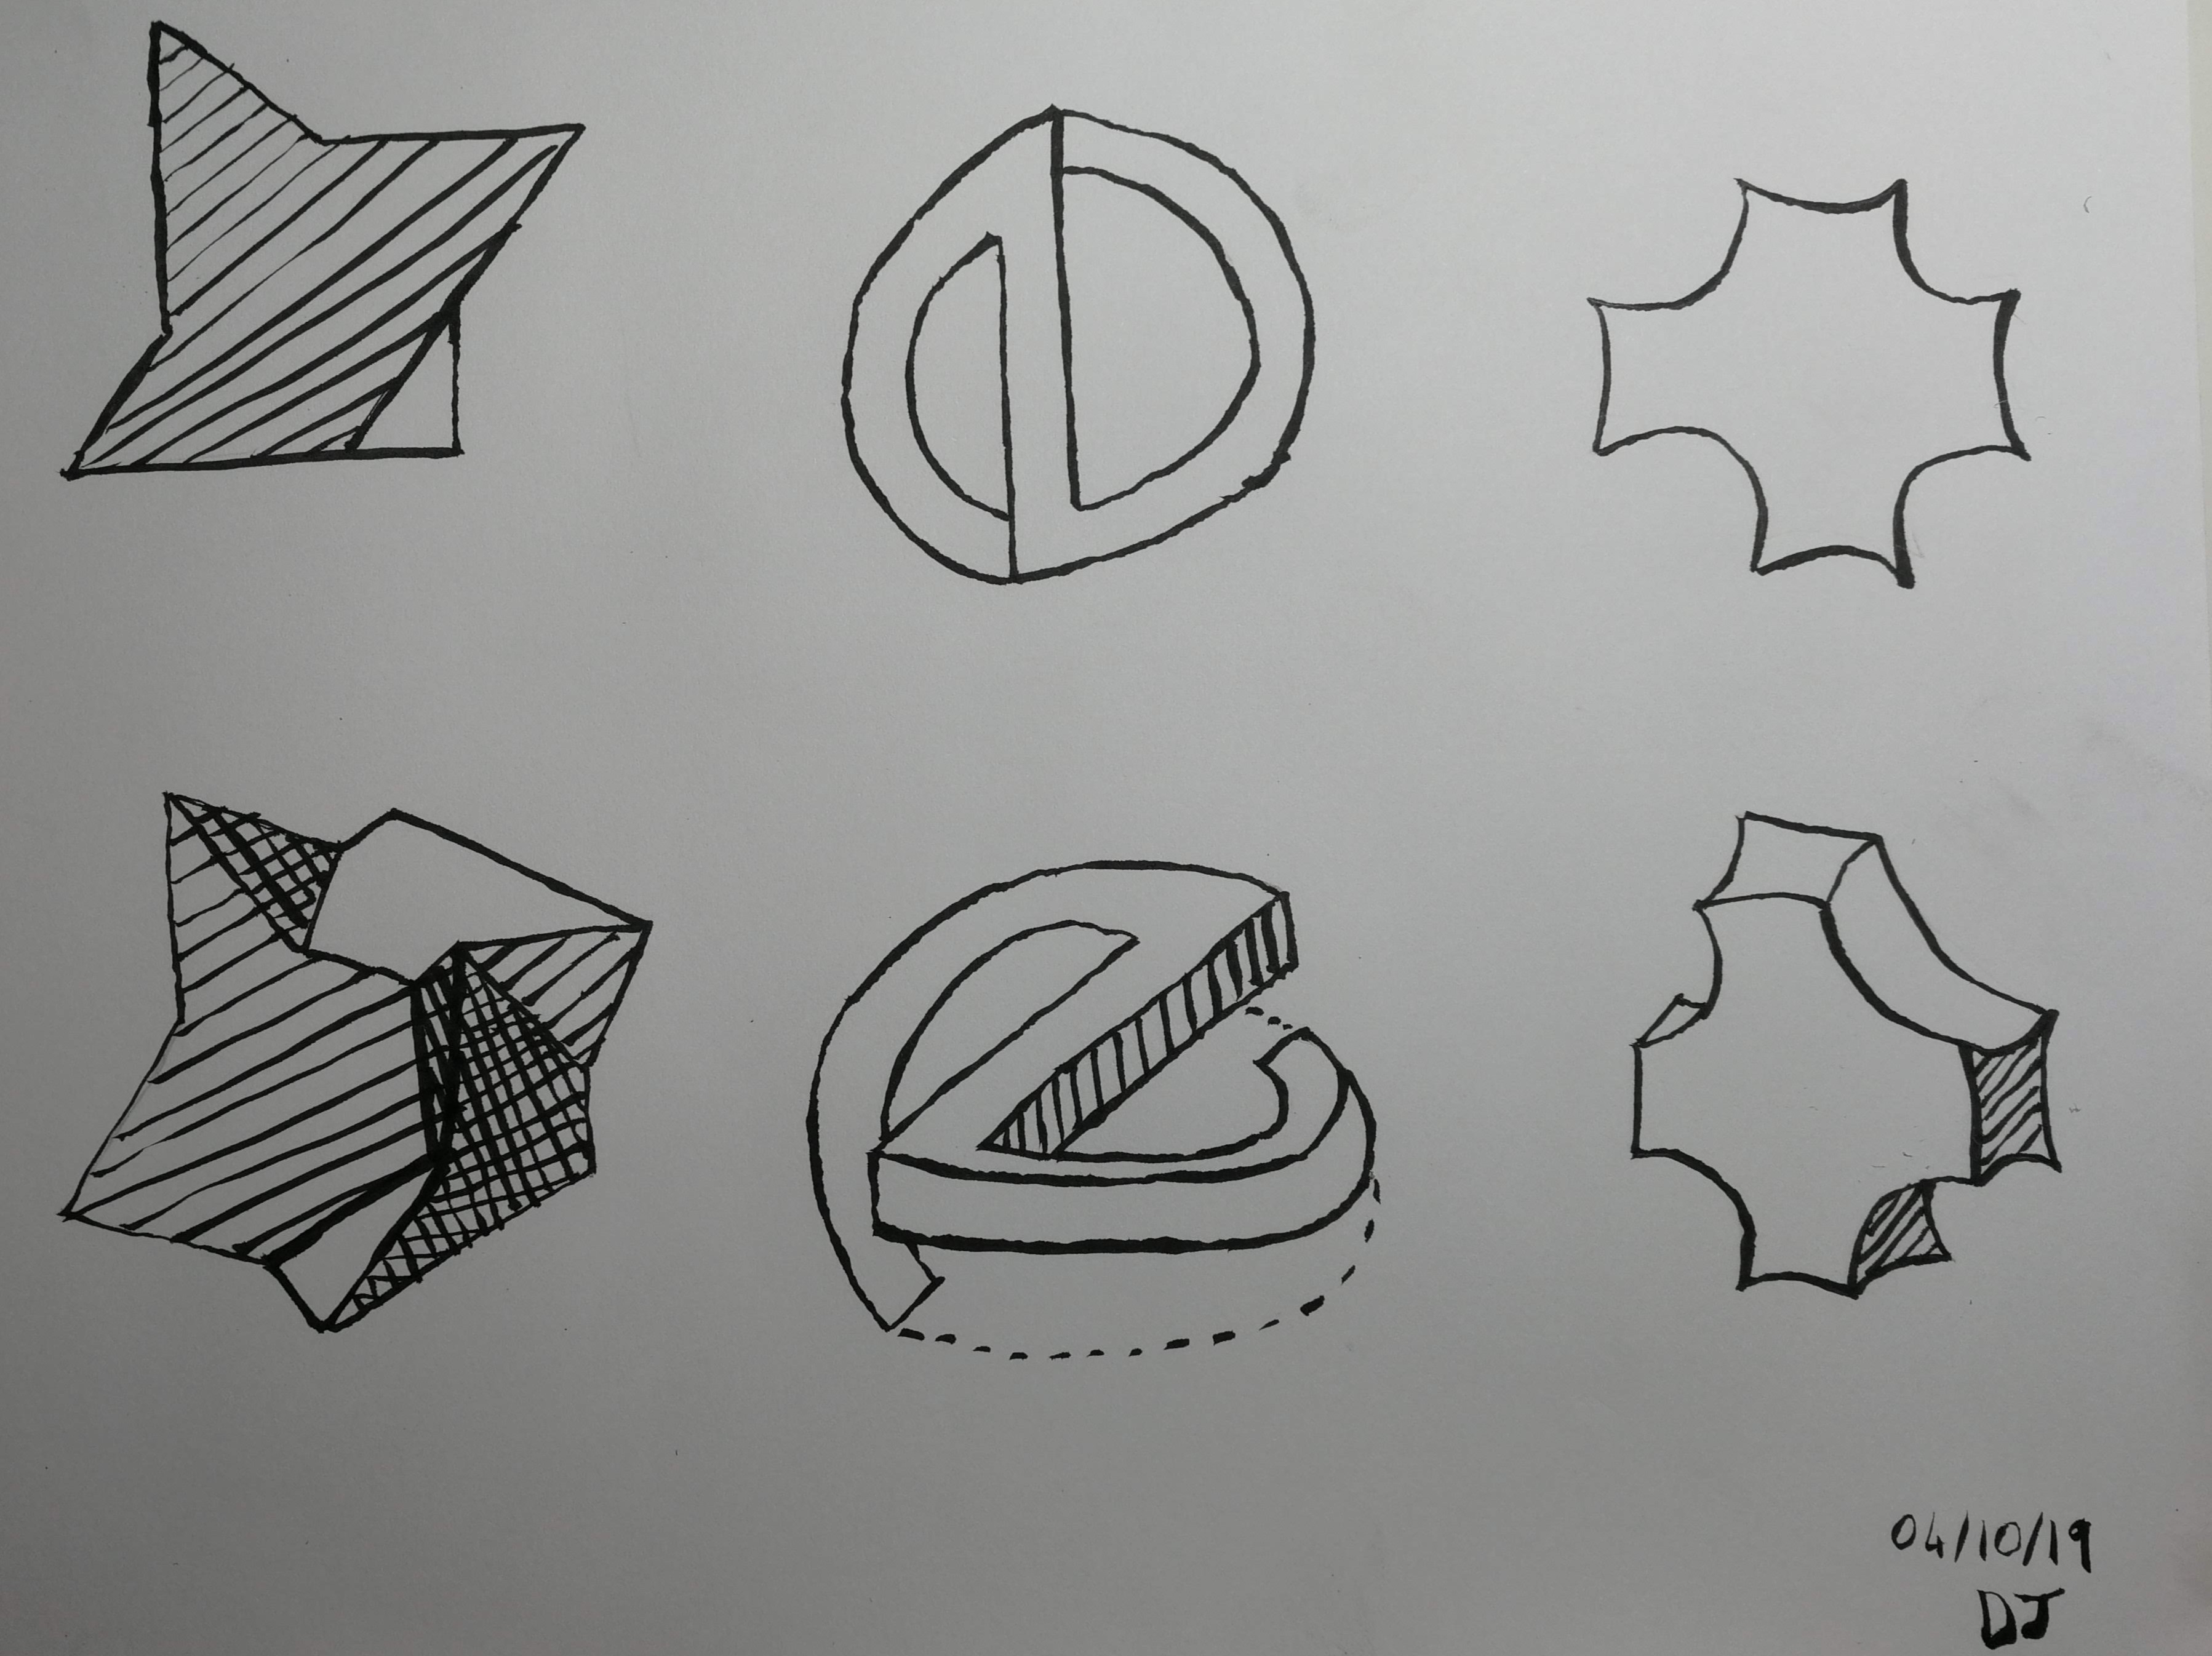 &ldquo;3D forms drawn from different views for day 4 of Inktober 2019&rdquo;